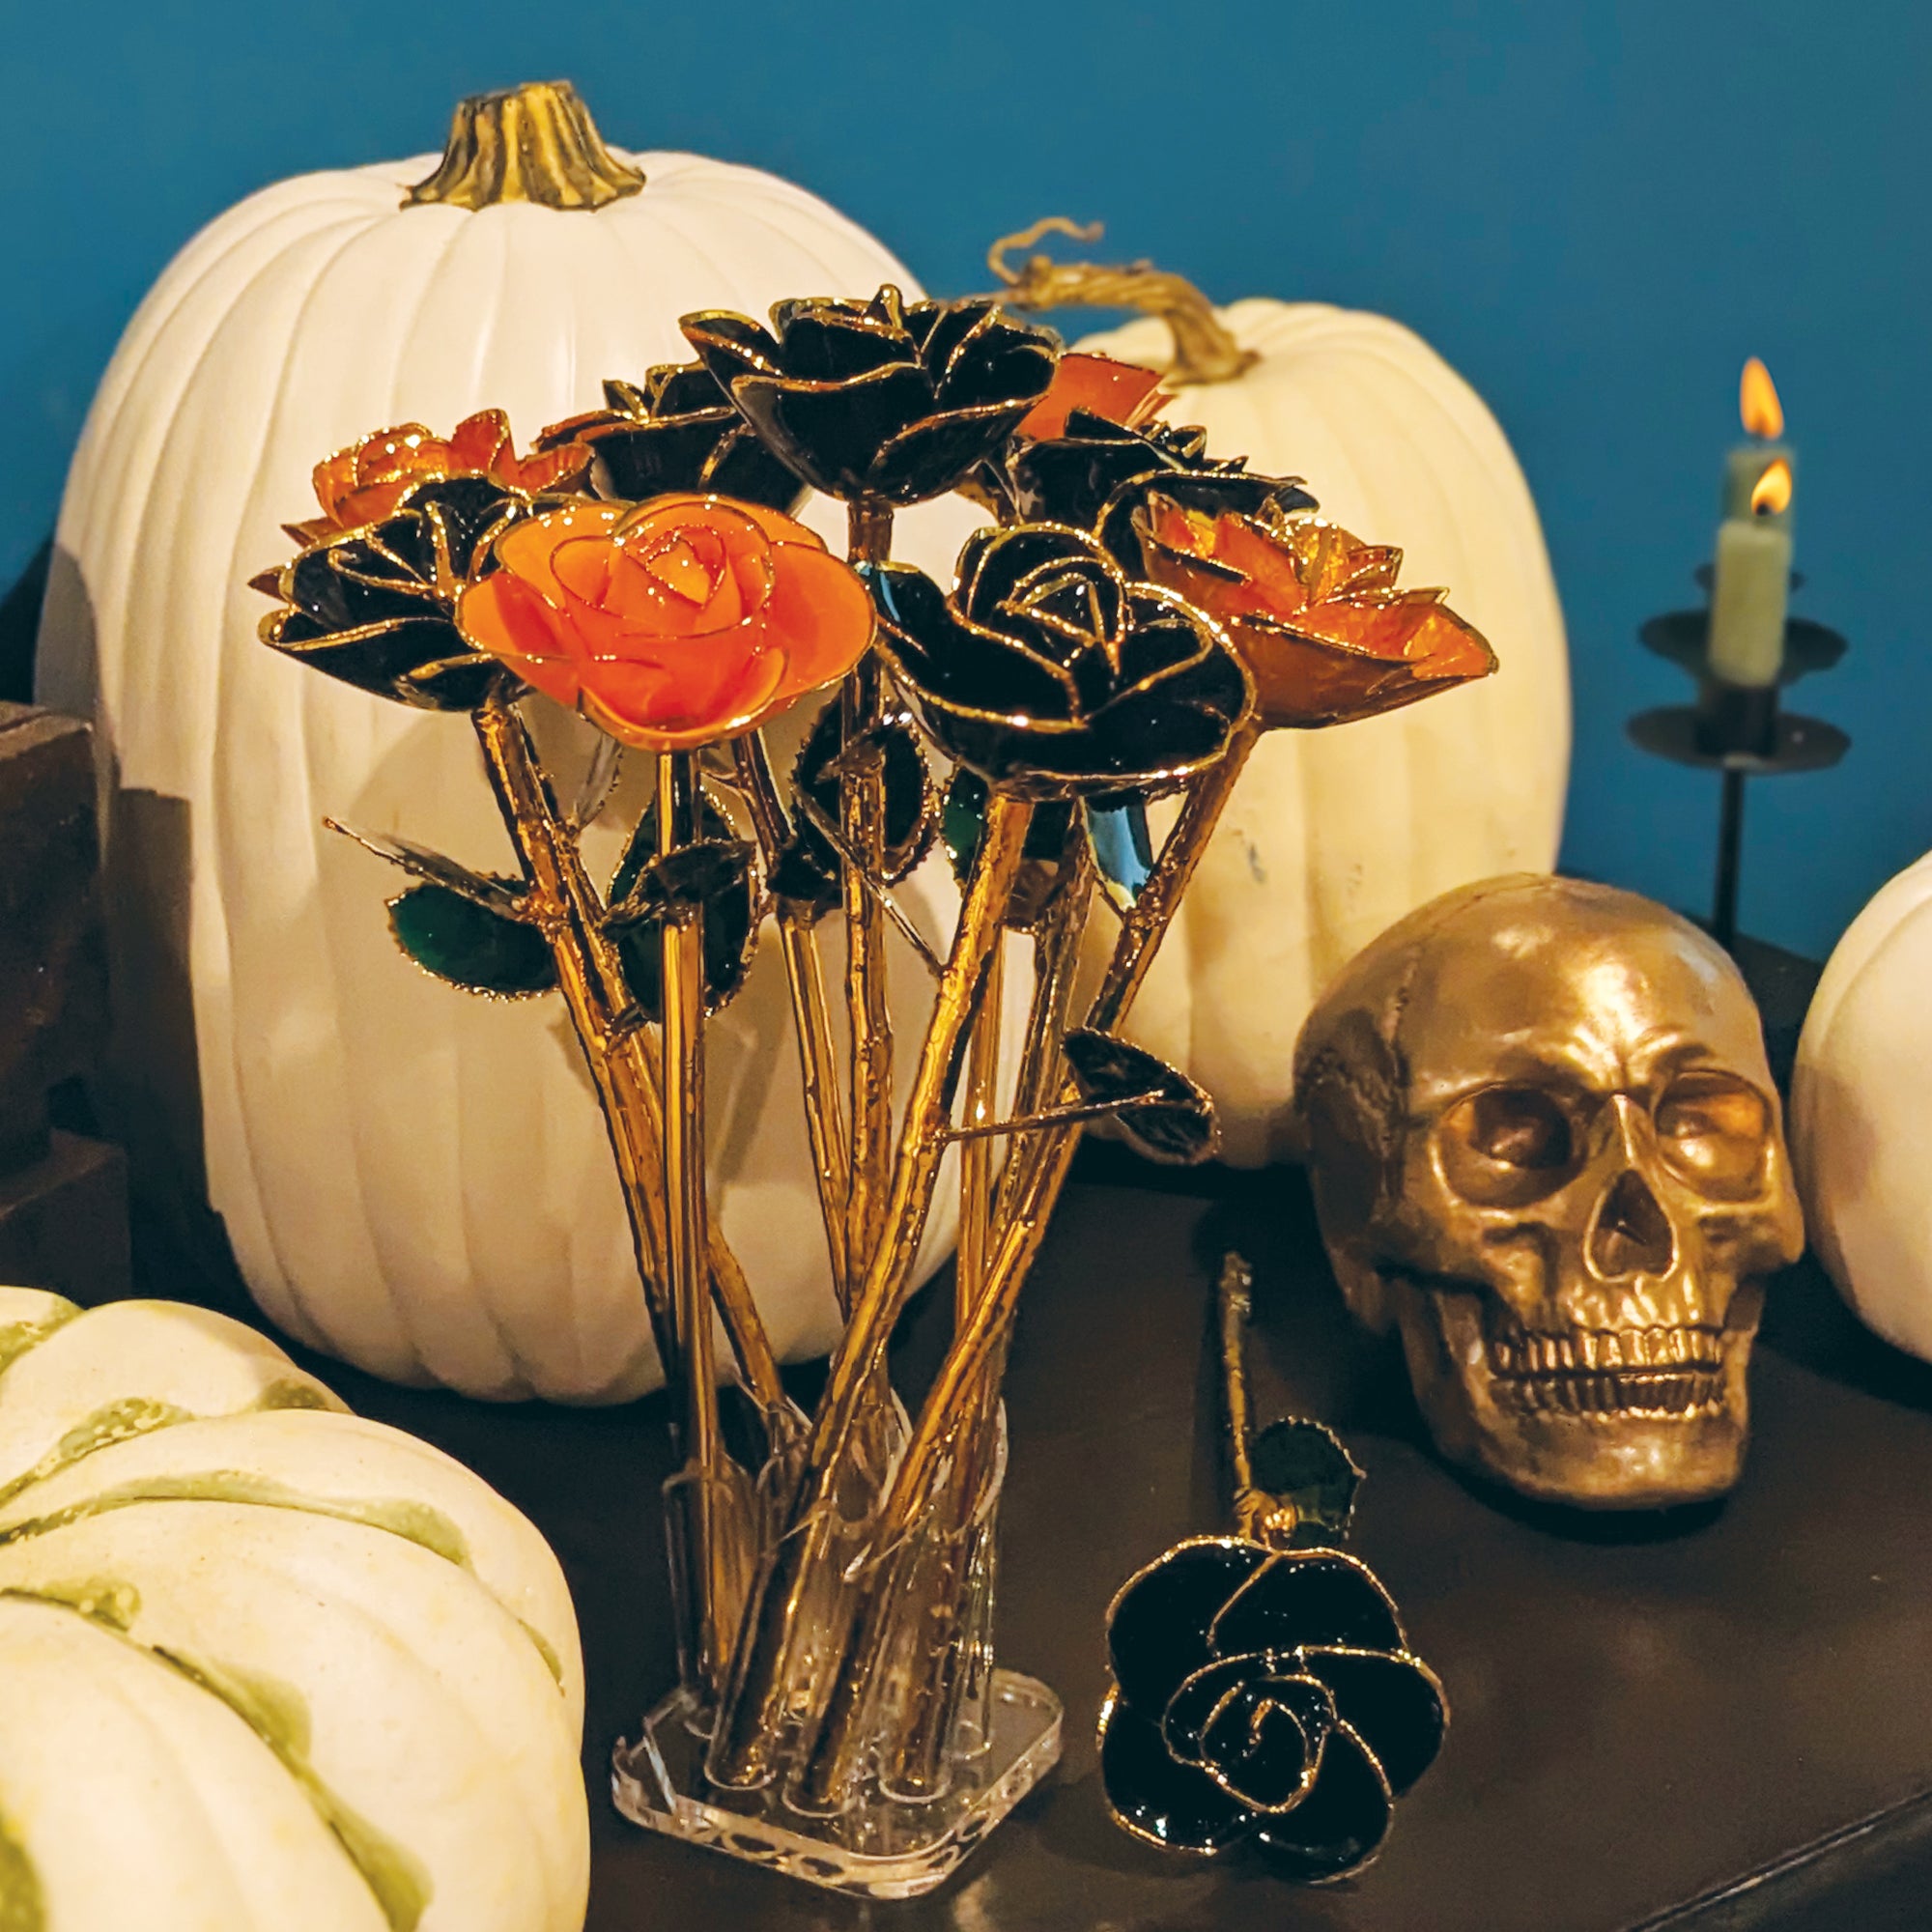 Steven Singer Jewelers' Creamsicle and Black Diamond Gold Dipped Roses pictured with Halloween decor.